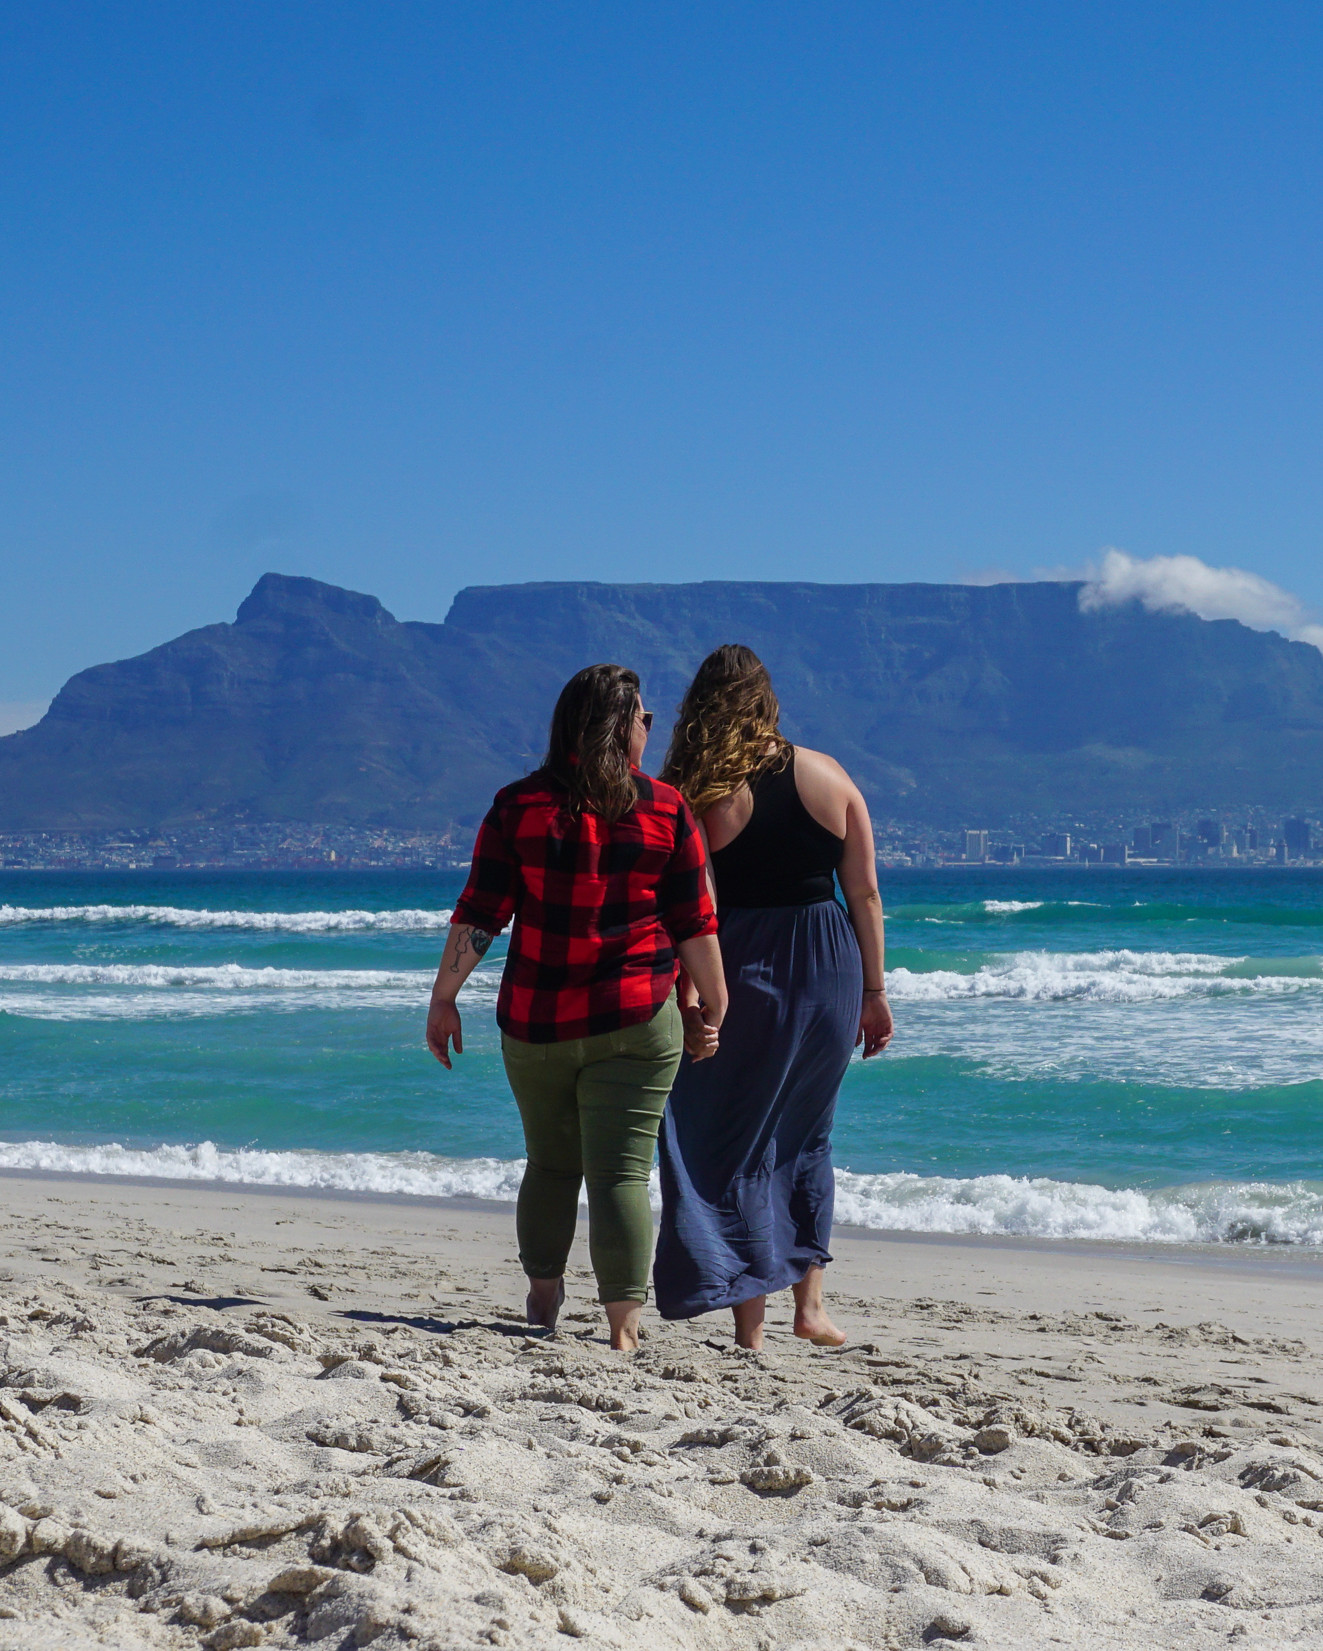 South Africa lesbians on beach in cape town